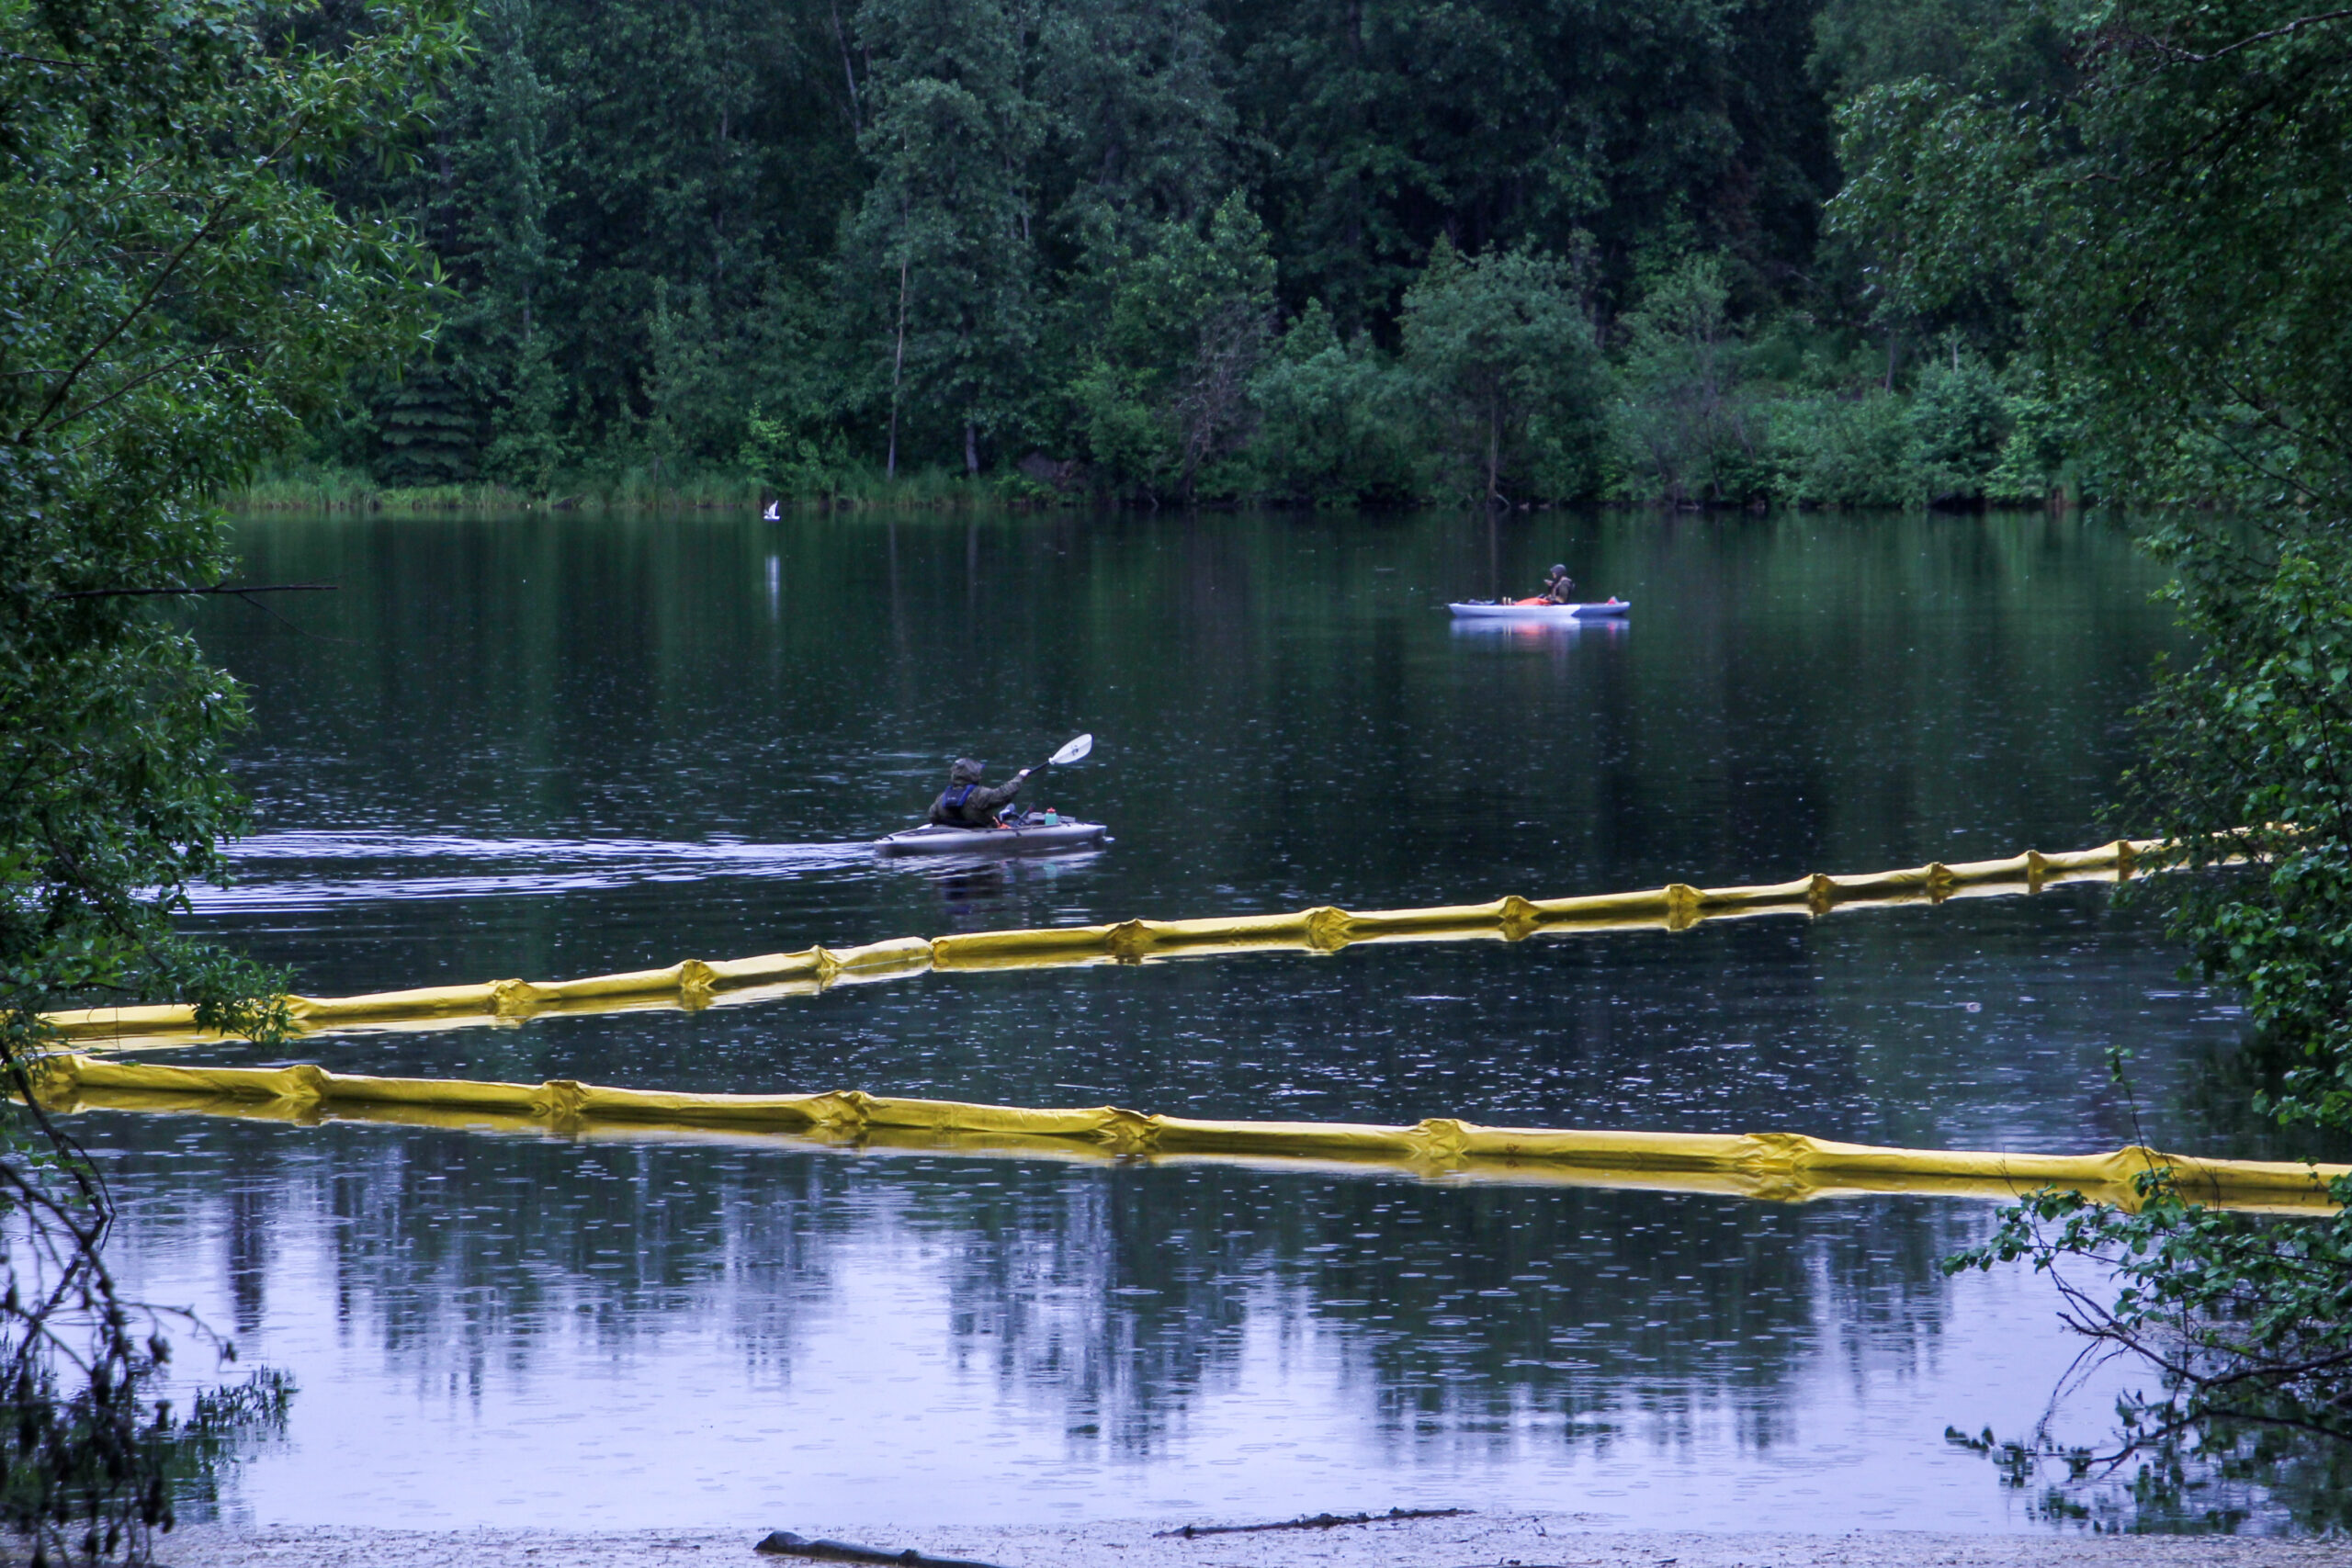 two kayakers in a lake next to lines of yellow floats